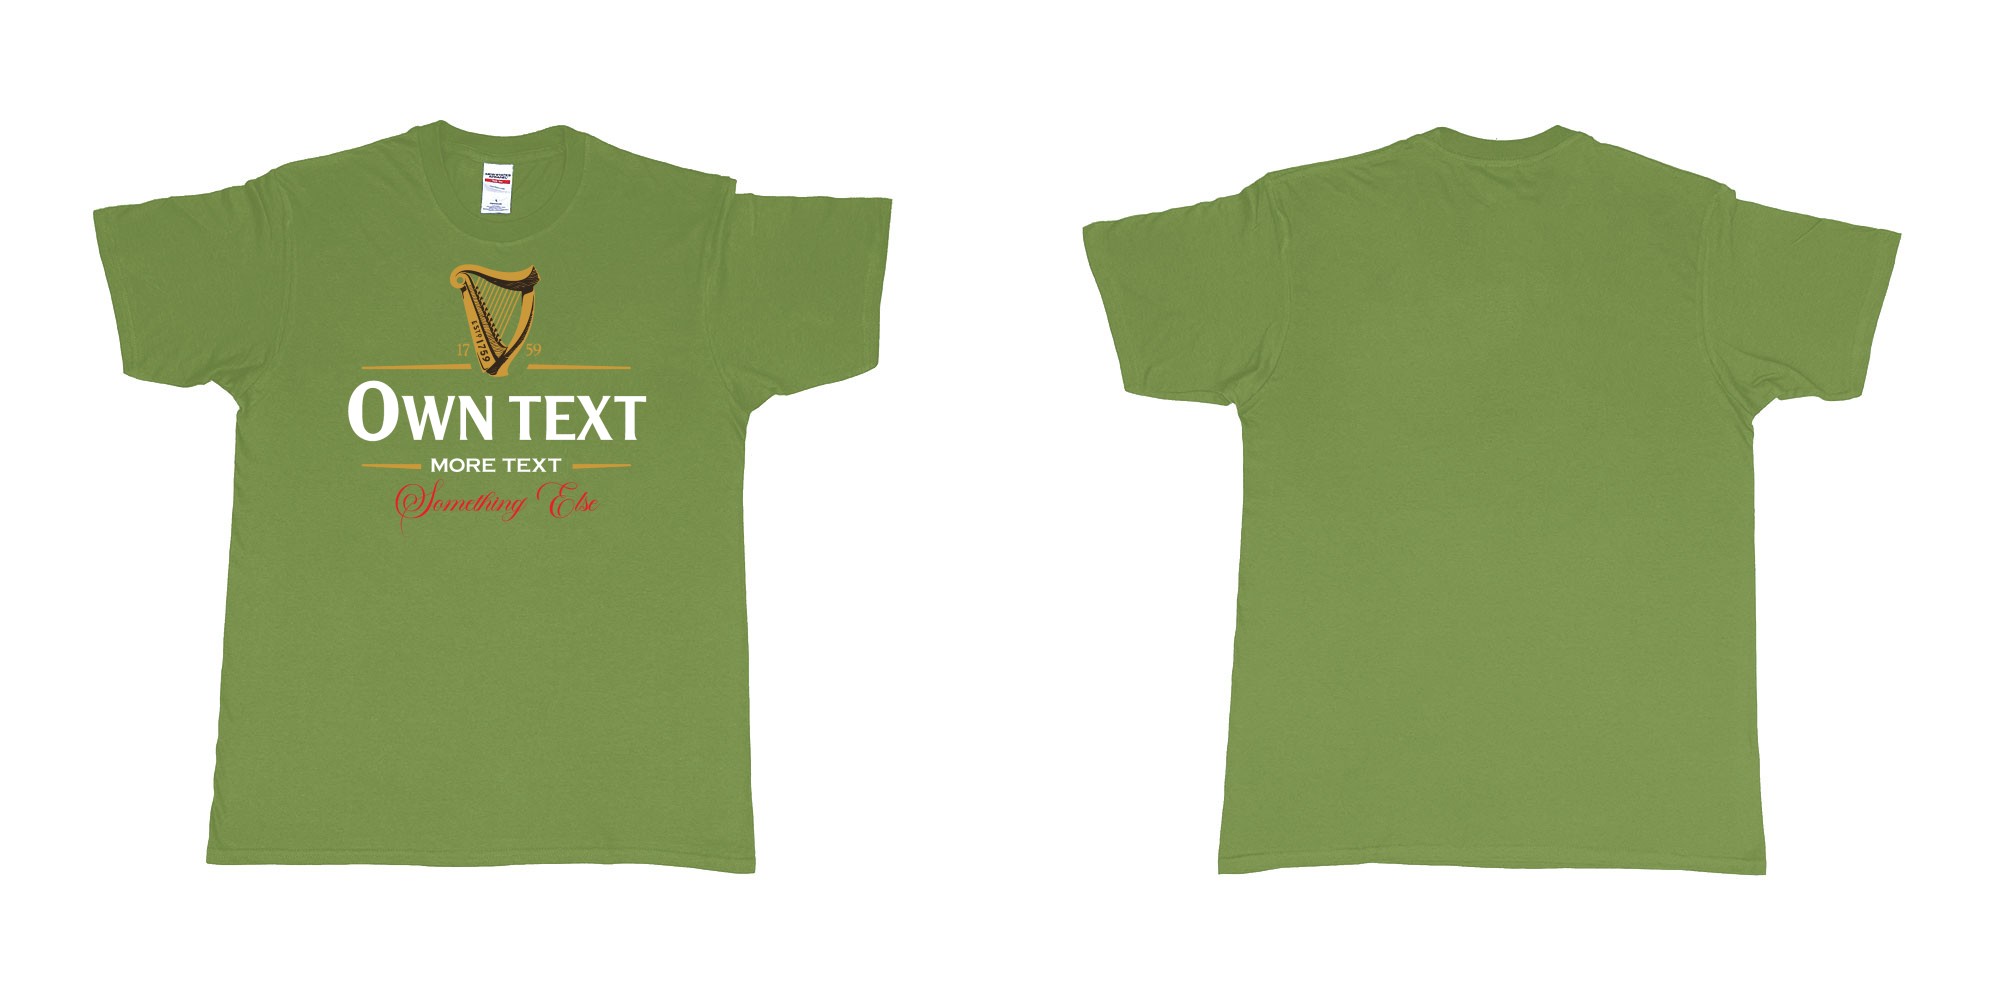 Custom tshirt design guinness beer custom text teeshirt printing in fabric color military-green choice your own text made in Bali by The Pirate Way